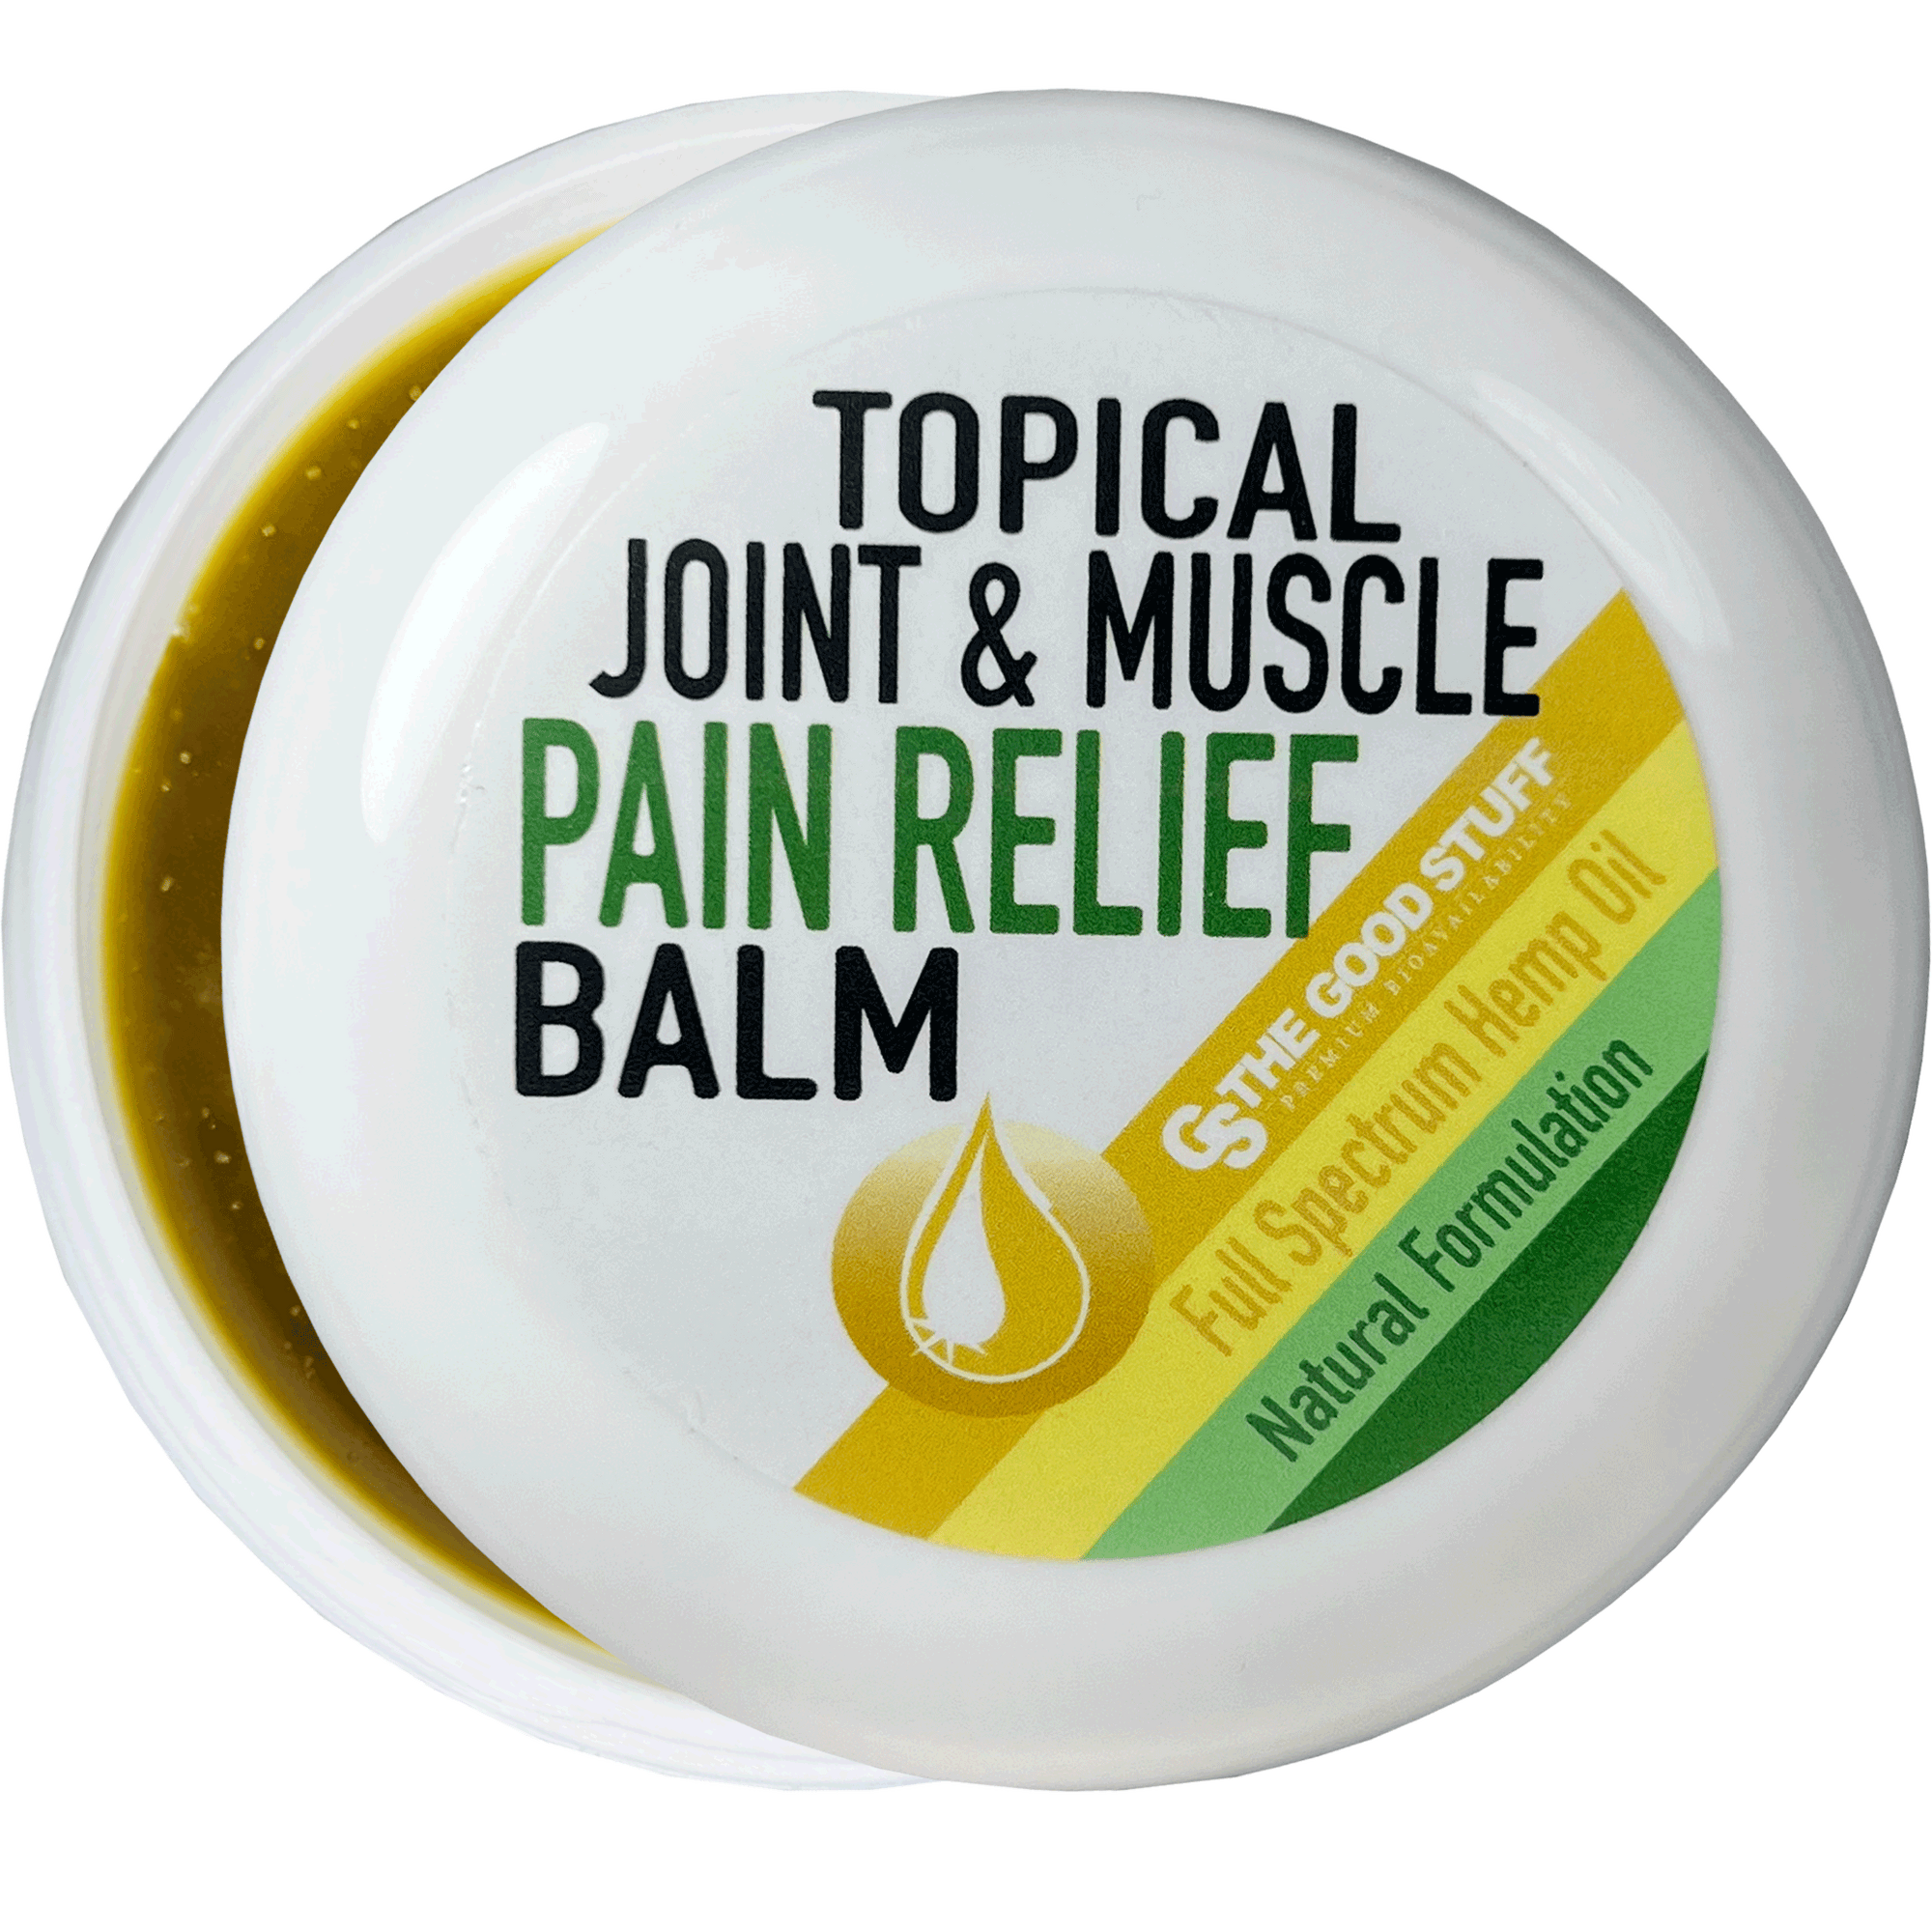 Topical Joint & Muscle Pain Relief Balm